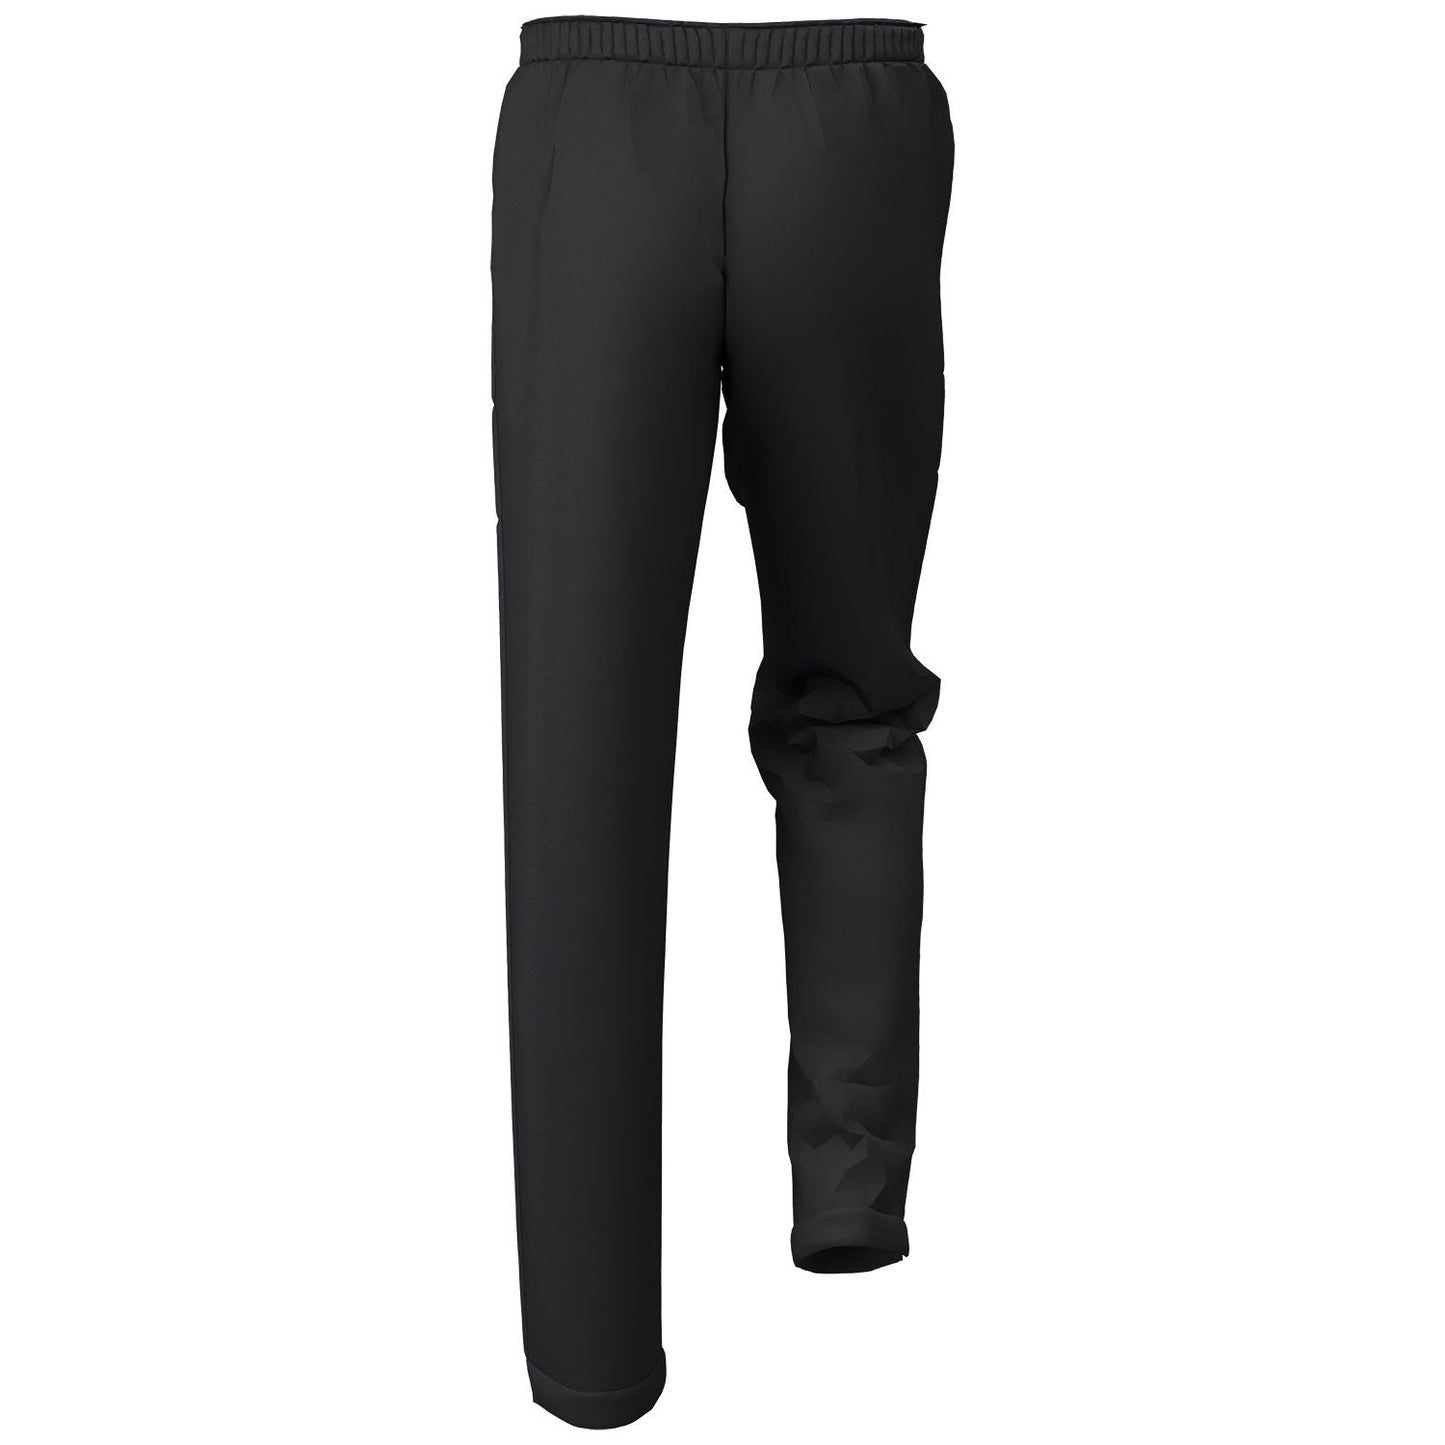 Exeter University Boat Club Standard Tracksuit Trousers